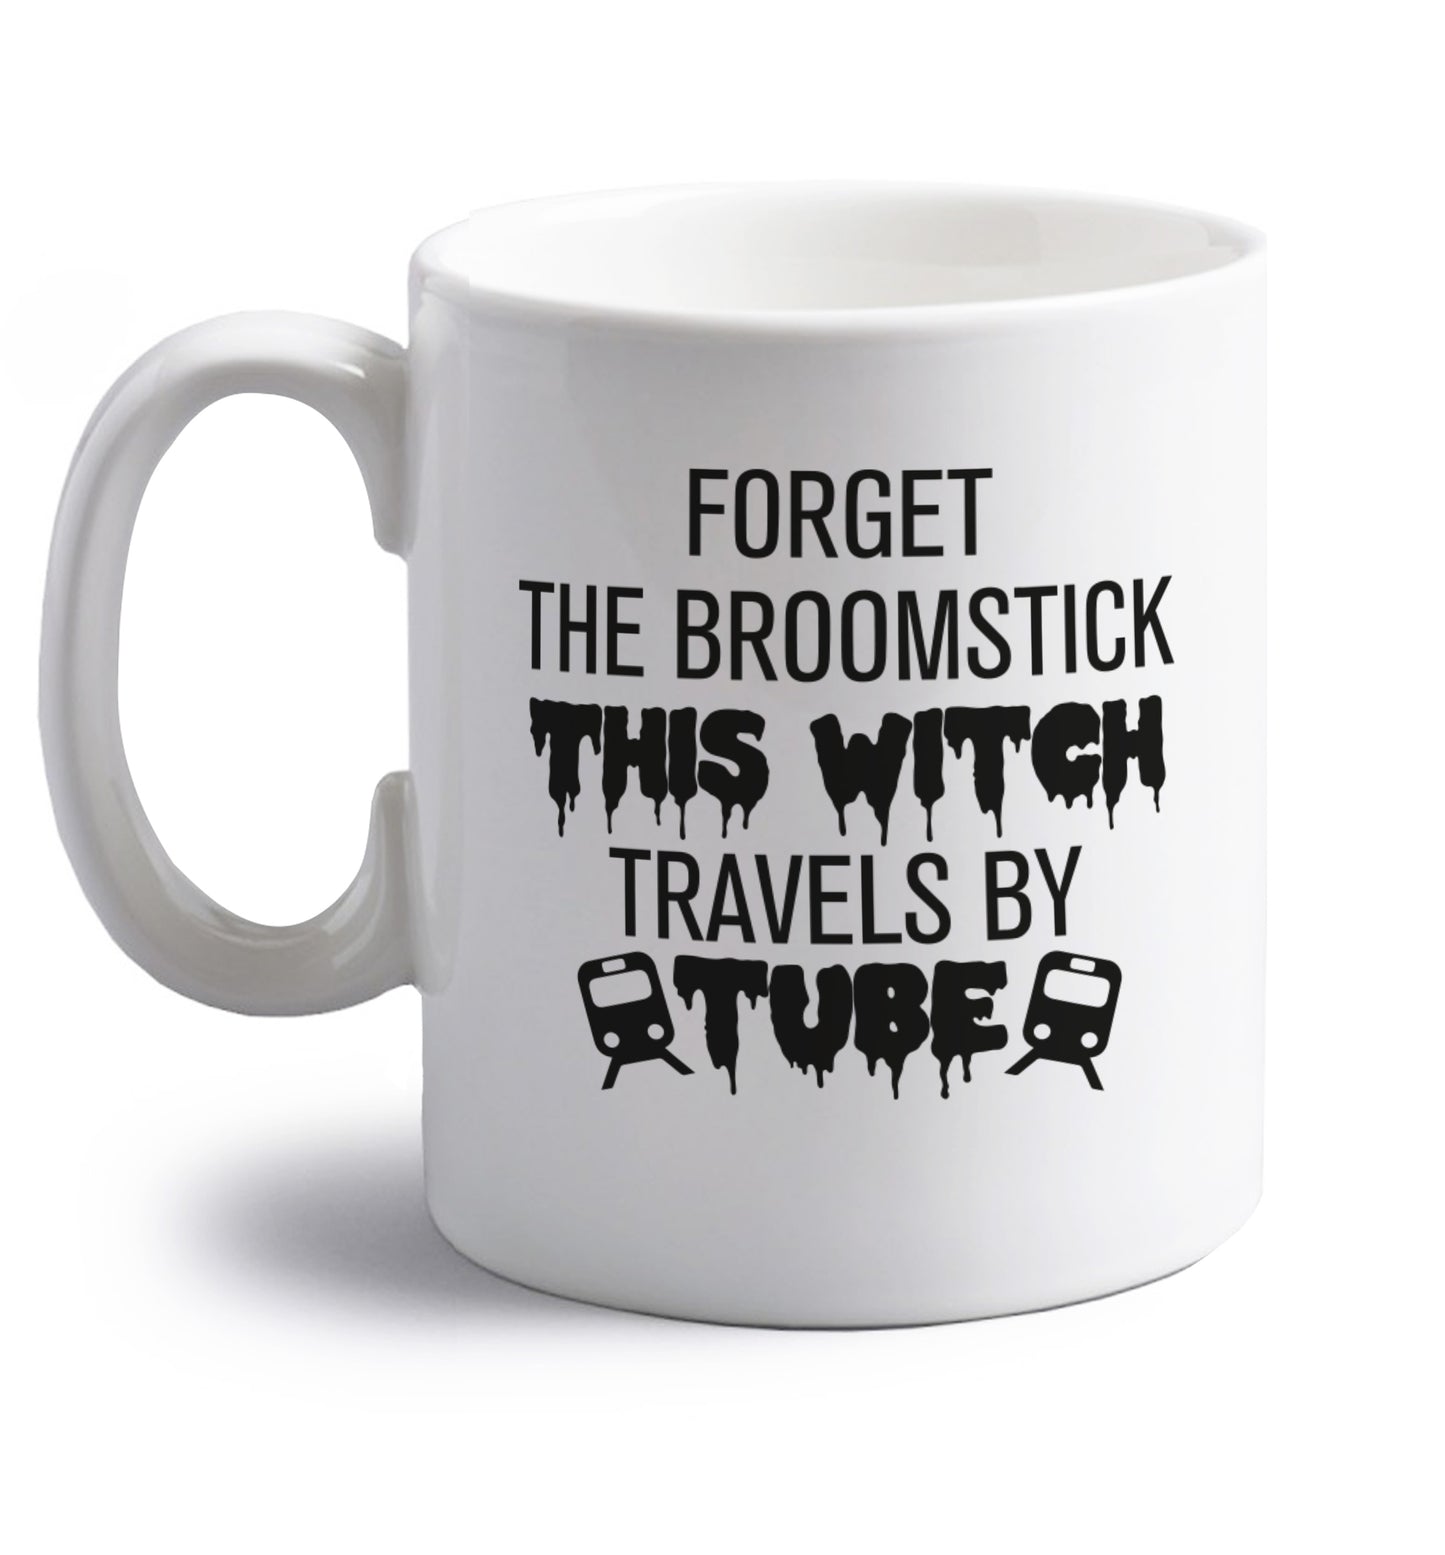 Forget the broomstick this witch travels by tube right handed white ceramic mug 